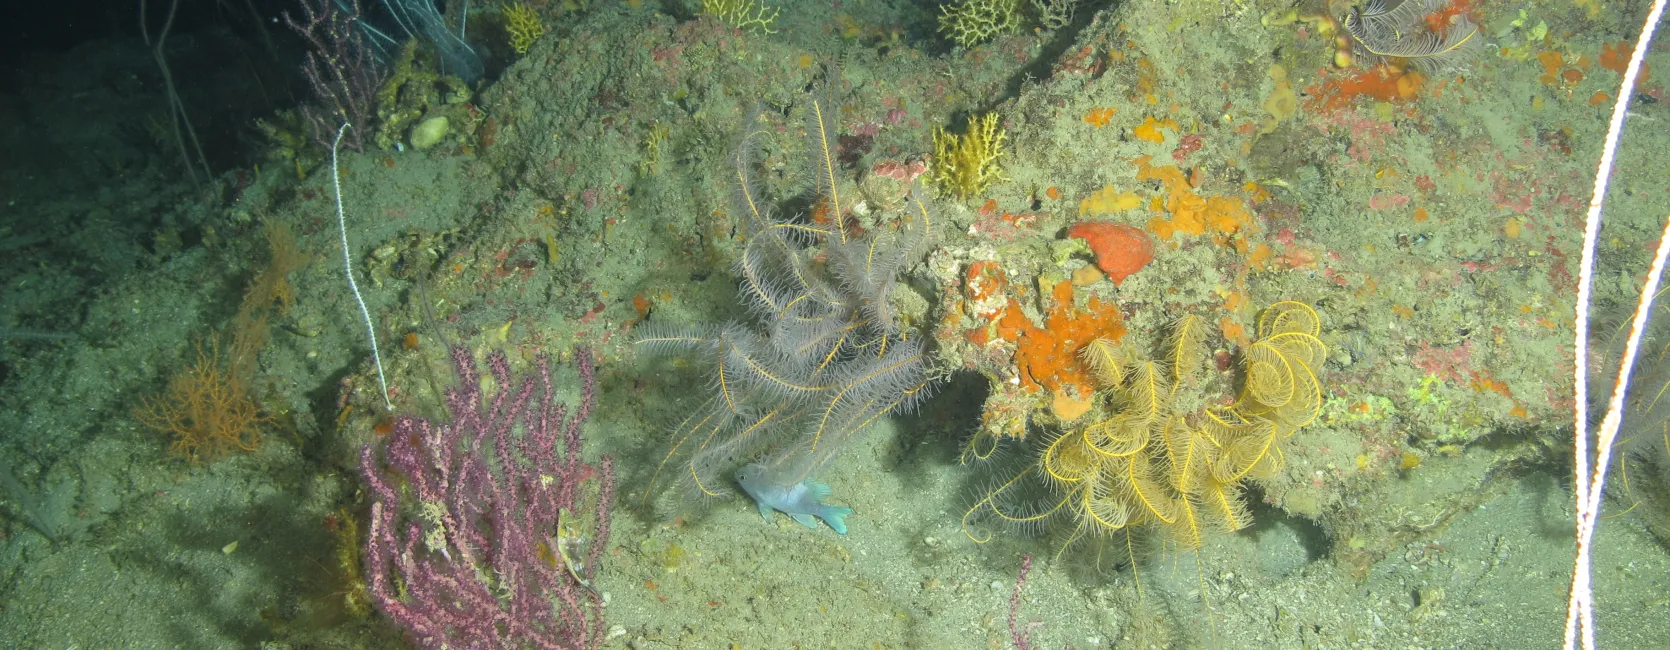 Brownish grey rocks and sand on the dark seafloor are illuminated by a flood light, showing patches of yellow, orange and pink sponges. Purple, white, and yellow soft corals are attached to the rocks, and long feathery arms of crinoids poke out of crevices.